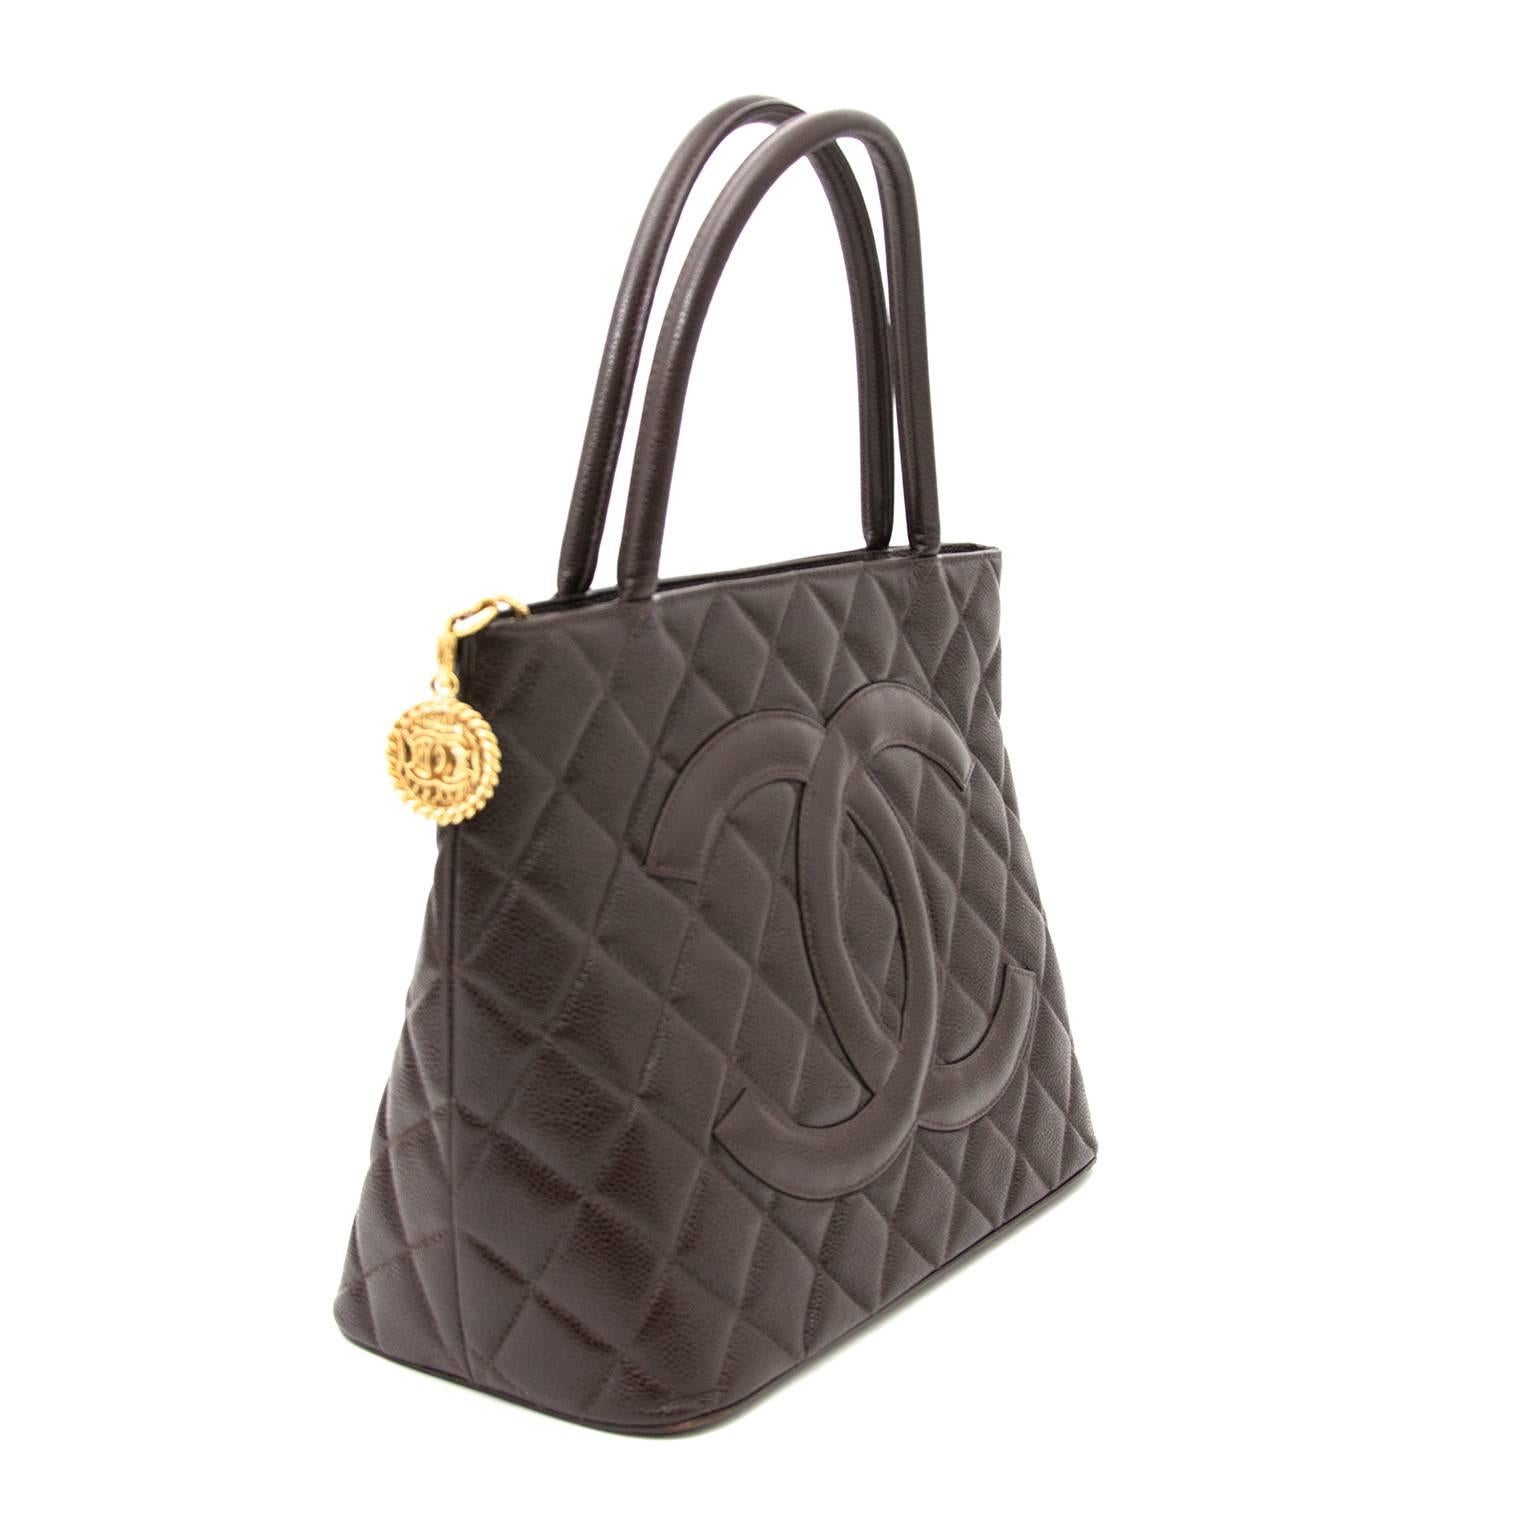 The caviar leather is soft and supple to the touch with a beautiful sheen. The gold tone CC medaillon logo zipper pull shows no signs of scratching/wear.  Handles stand upright.  The zipper closture opens to a wide interior with one zipper and one